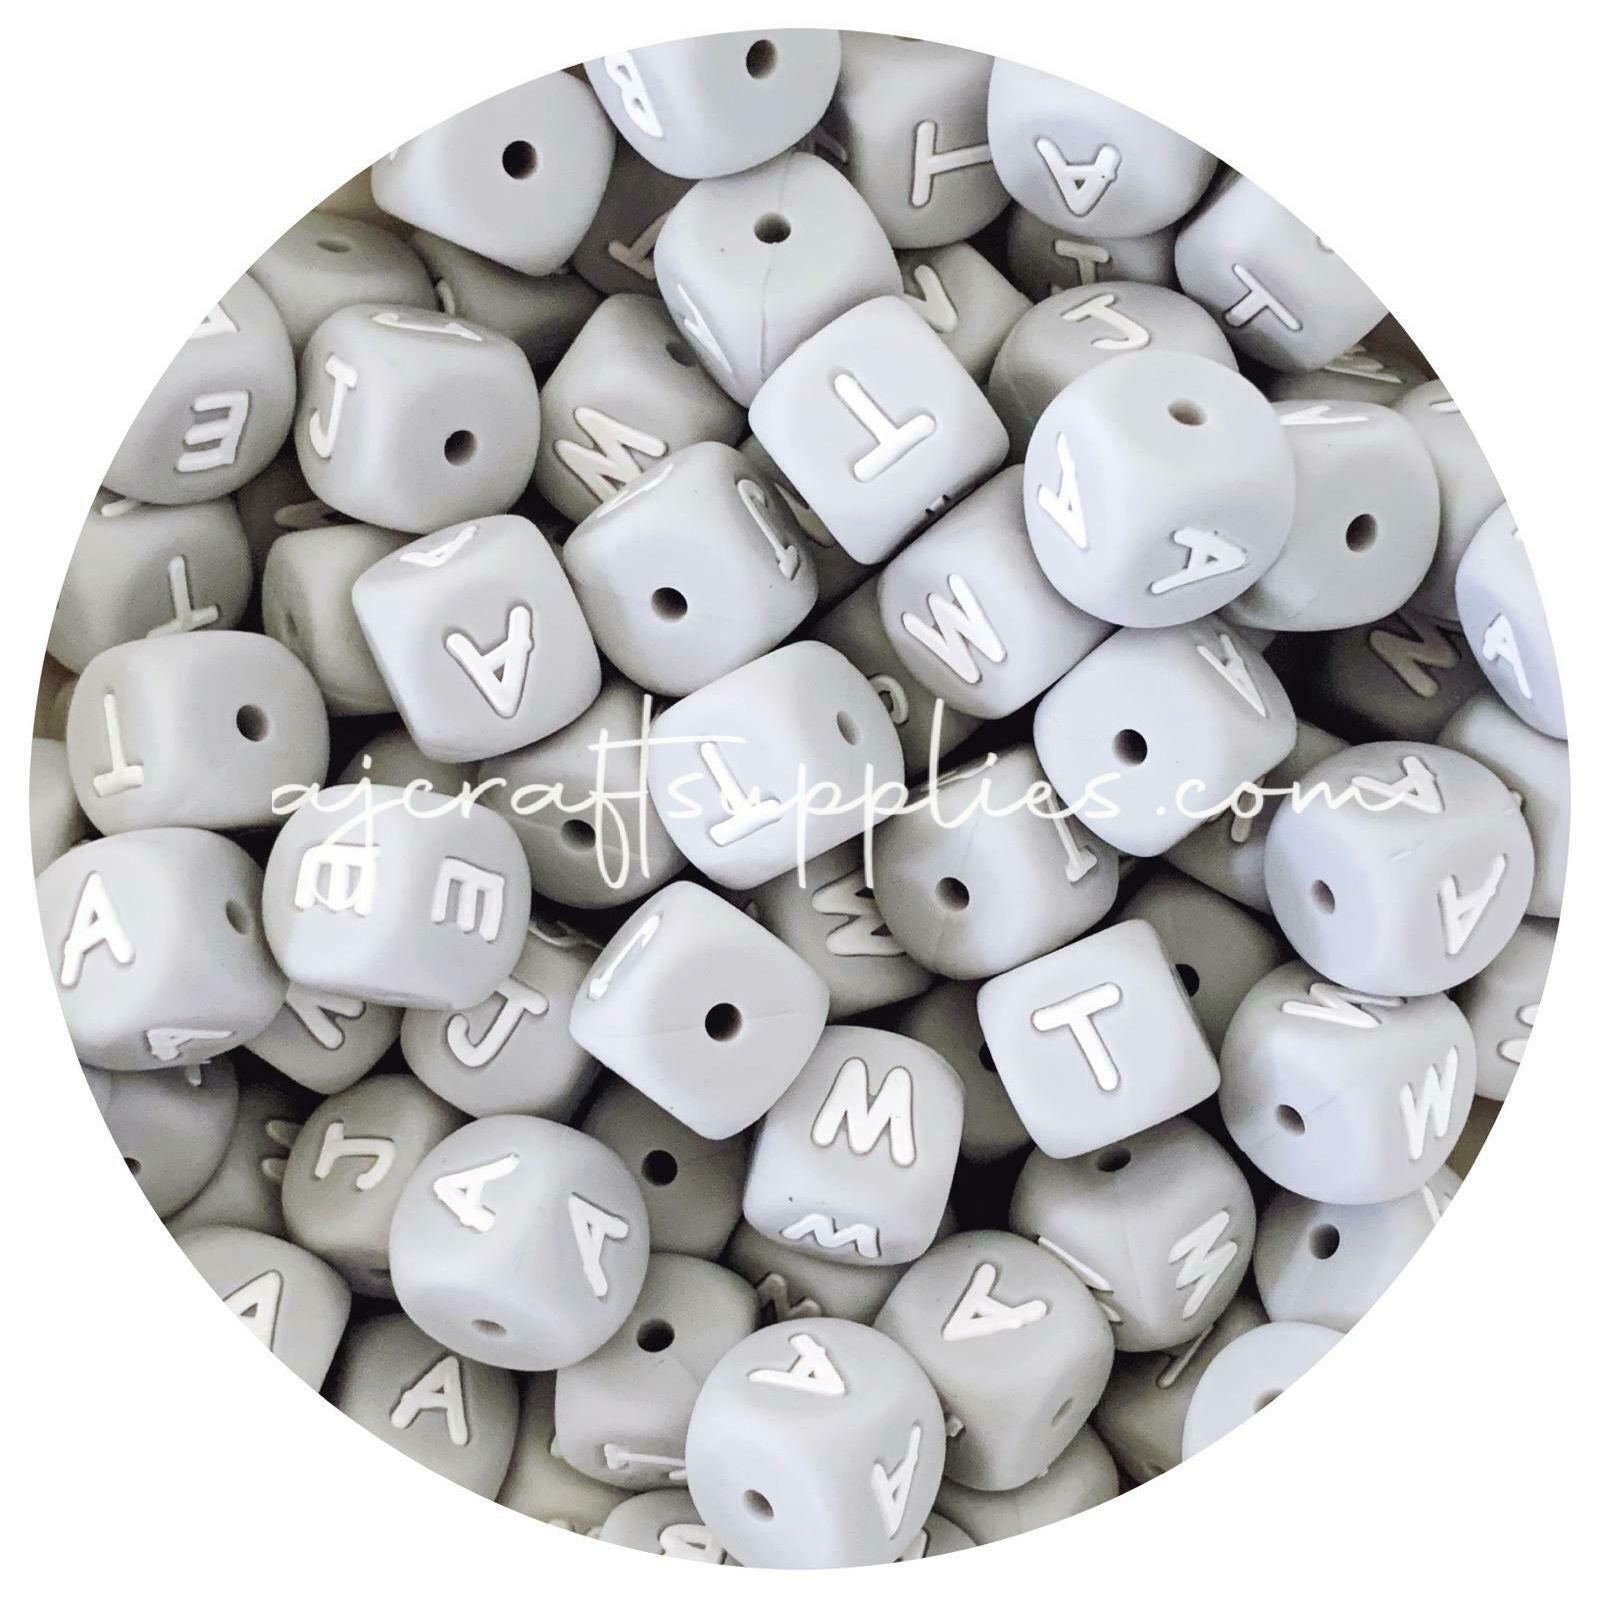 12mm Light Grey Silicone Letter Beads MIXED PACK - 50 beads